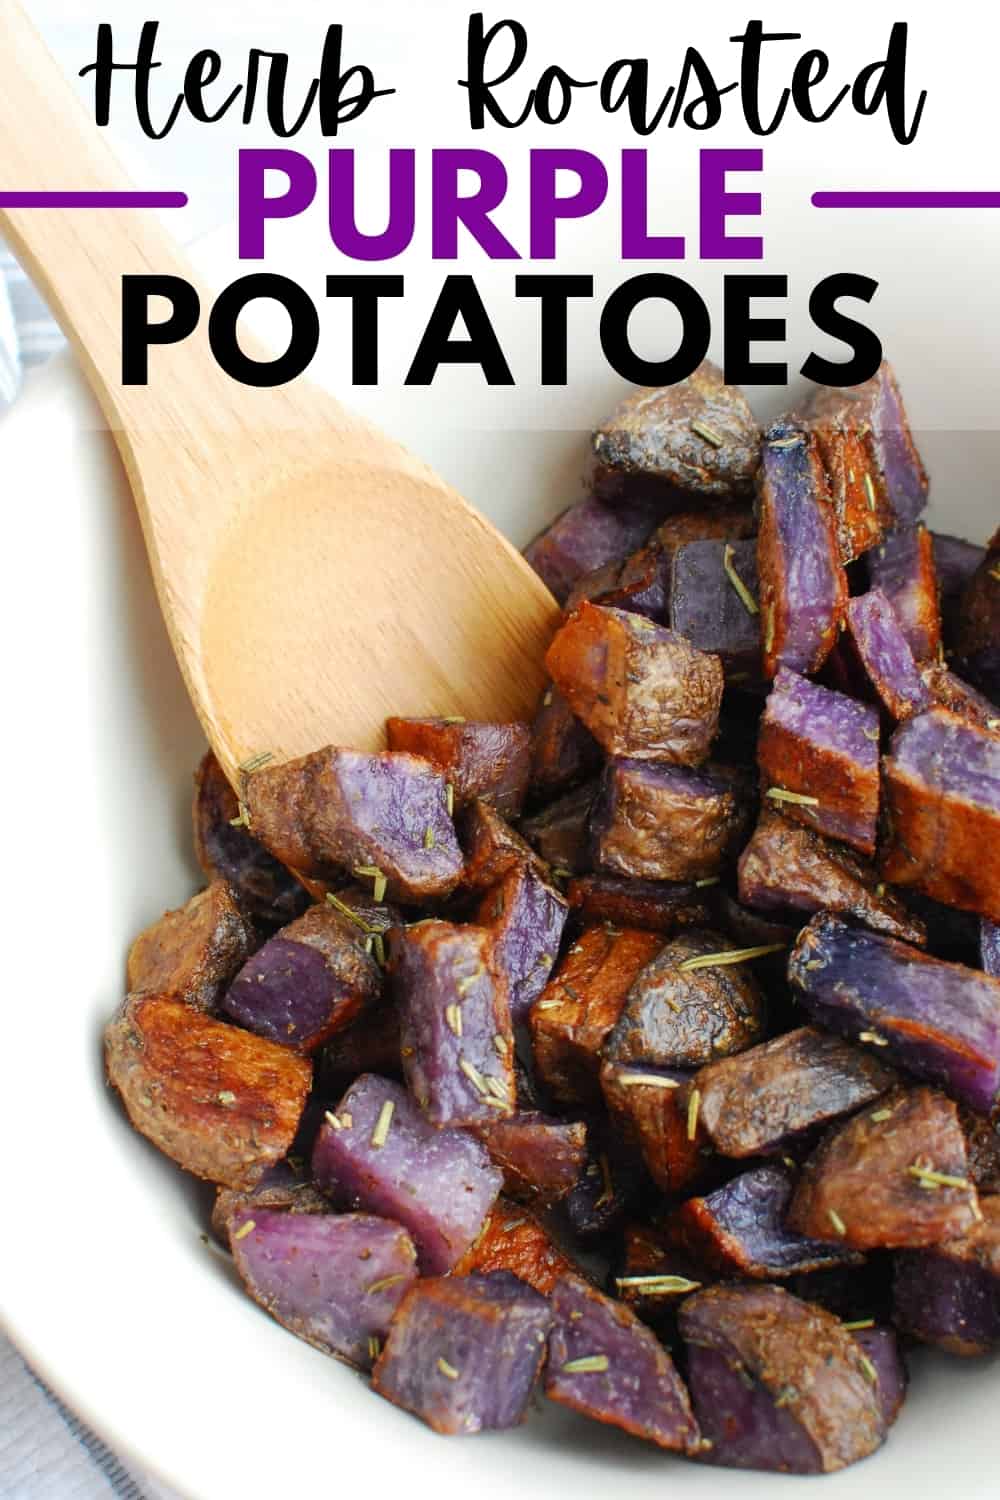 A bowl full of herb roasted purple potatoes with a wooden spoon in the bowl.